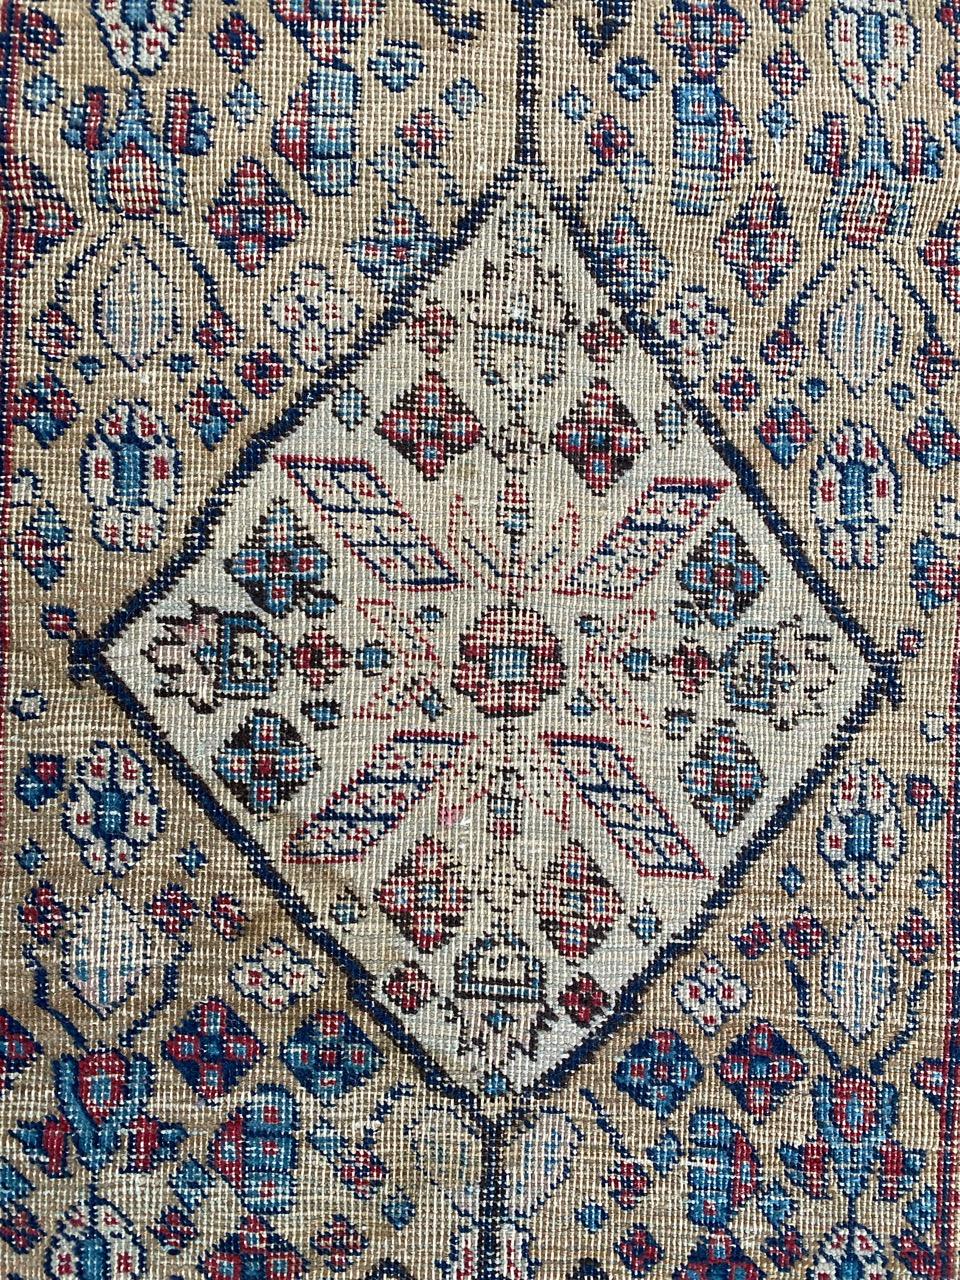 Pretty late 19th century tabriz rug with beautiful geometrical design and nice natural colors, entirely hand knotted with wool velvet on cotton foundation.

✨✨✨
